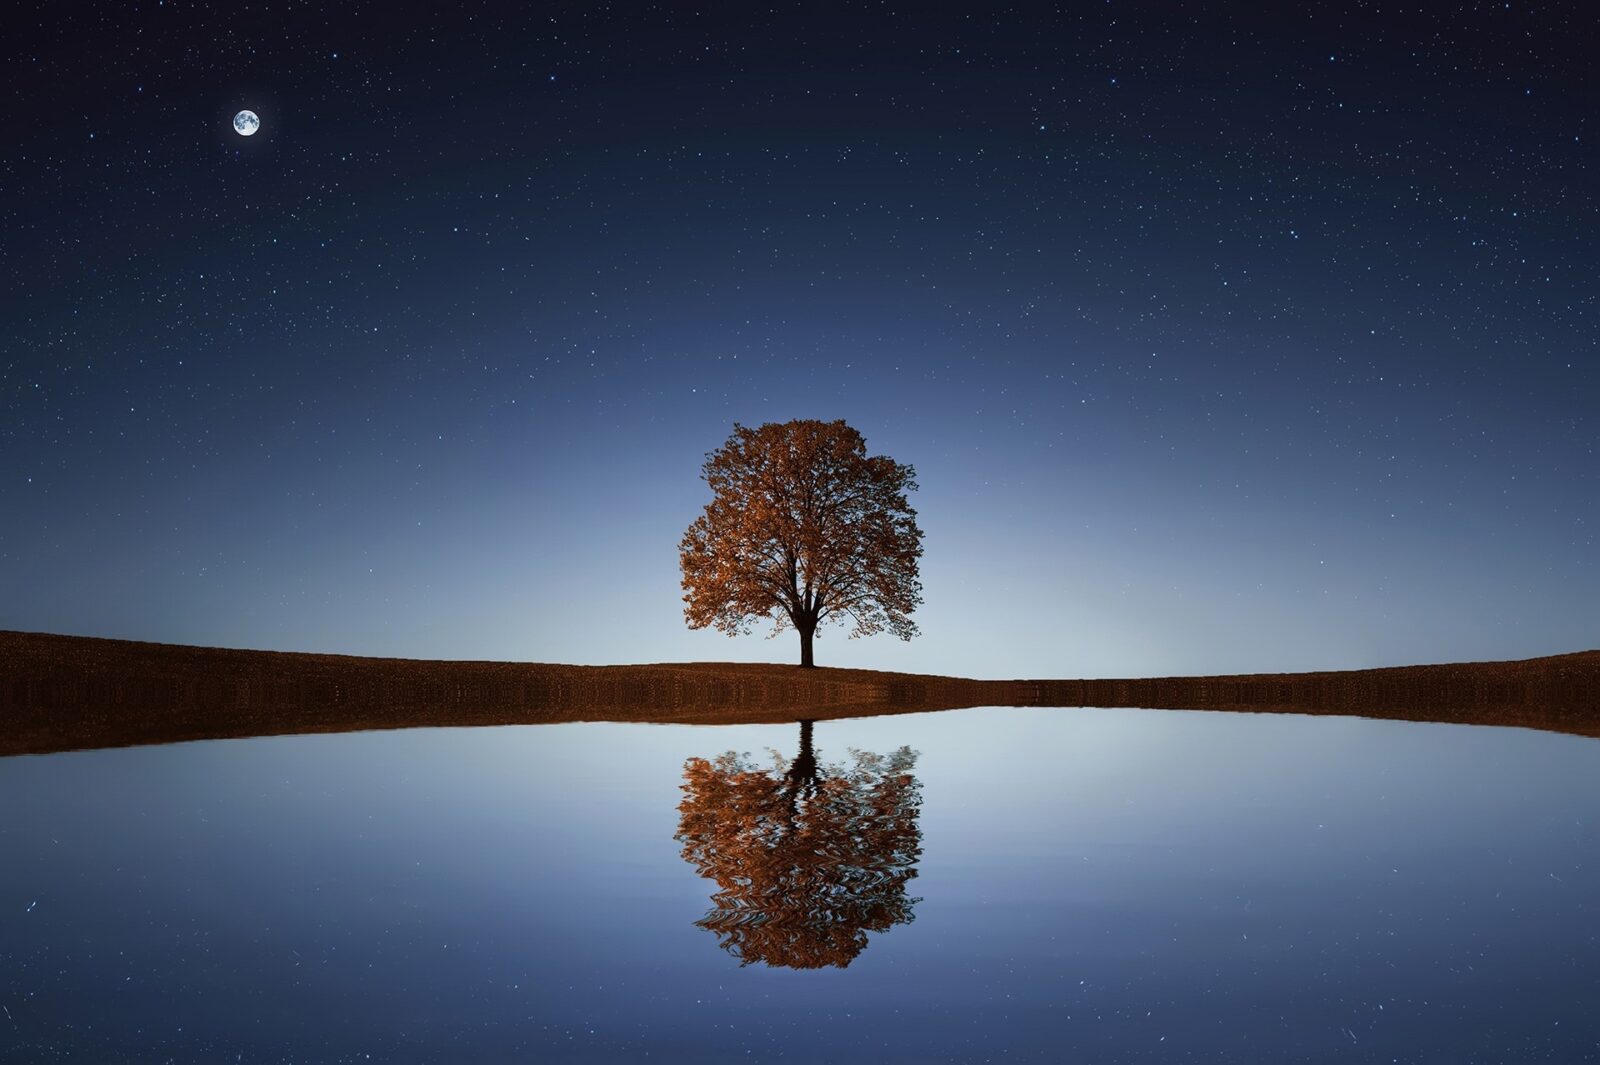 Reflection of a grown tree in the water at a distance at night.